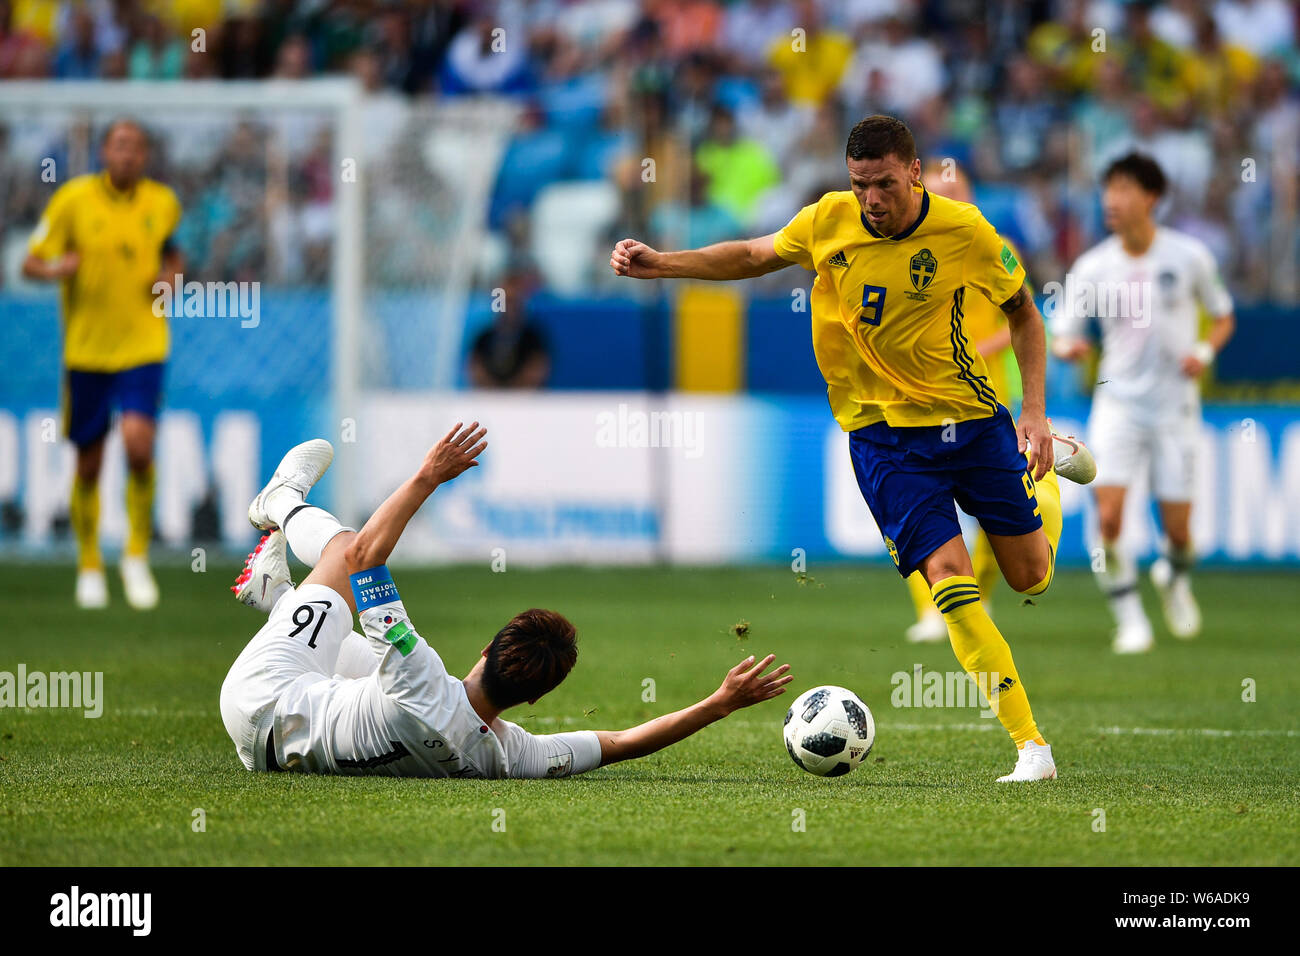 Marcus Berg of Sweden, right, challenges Ki Sung-yueng of South Korea in their Group F match during the FIFA World Cup 2018 in Nizhny Novgorod, Russia Stock Photo